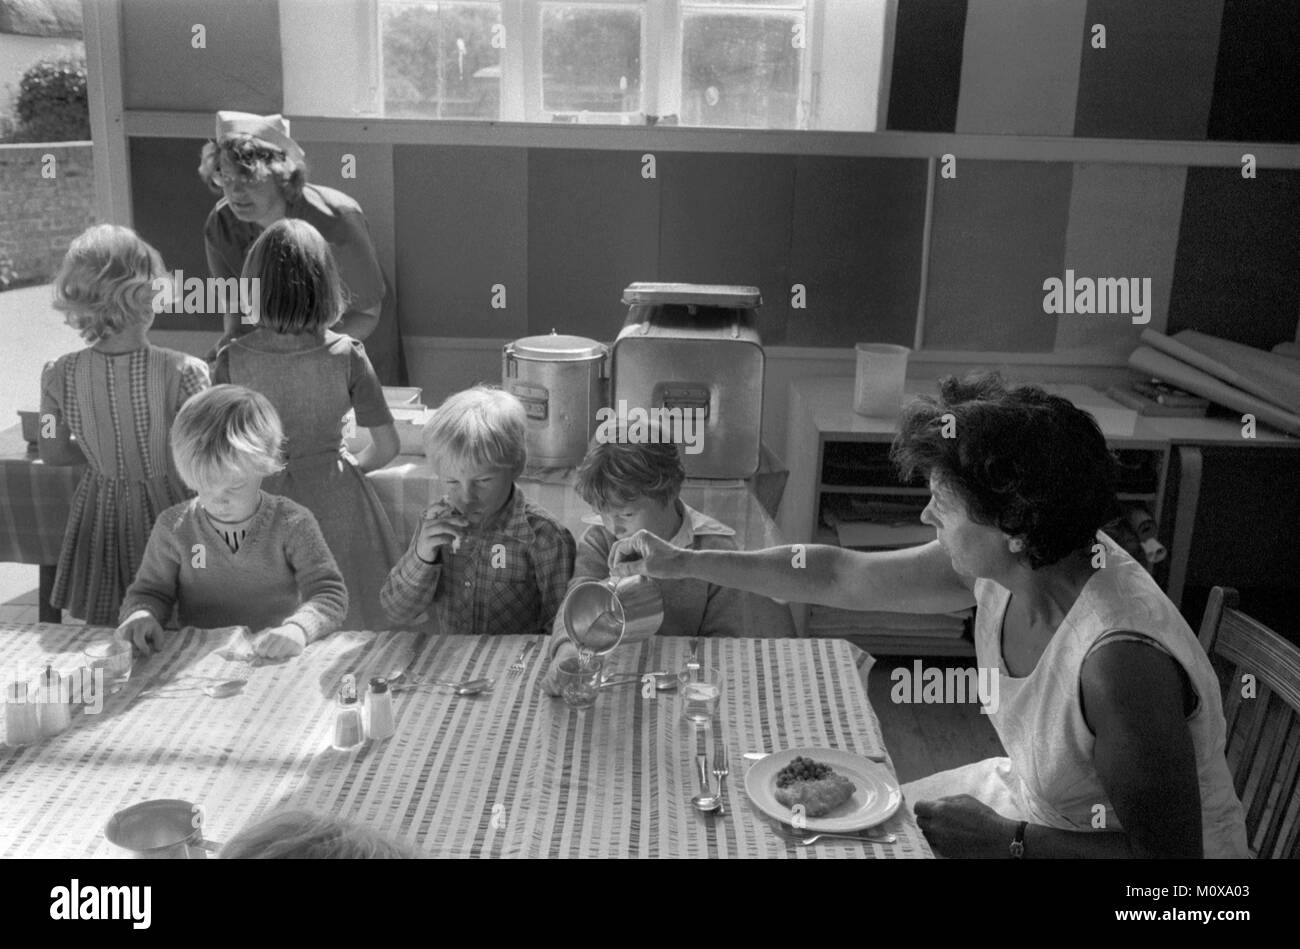 Village Primary school 1970s England. School children sit down together at one table with a member of staff and have lunch. School dinner lady. Cheveley Cambridgeshire 1978 UK HOMER SYKES Stock Photo